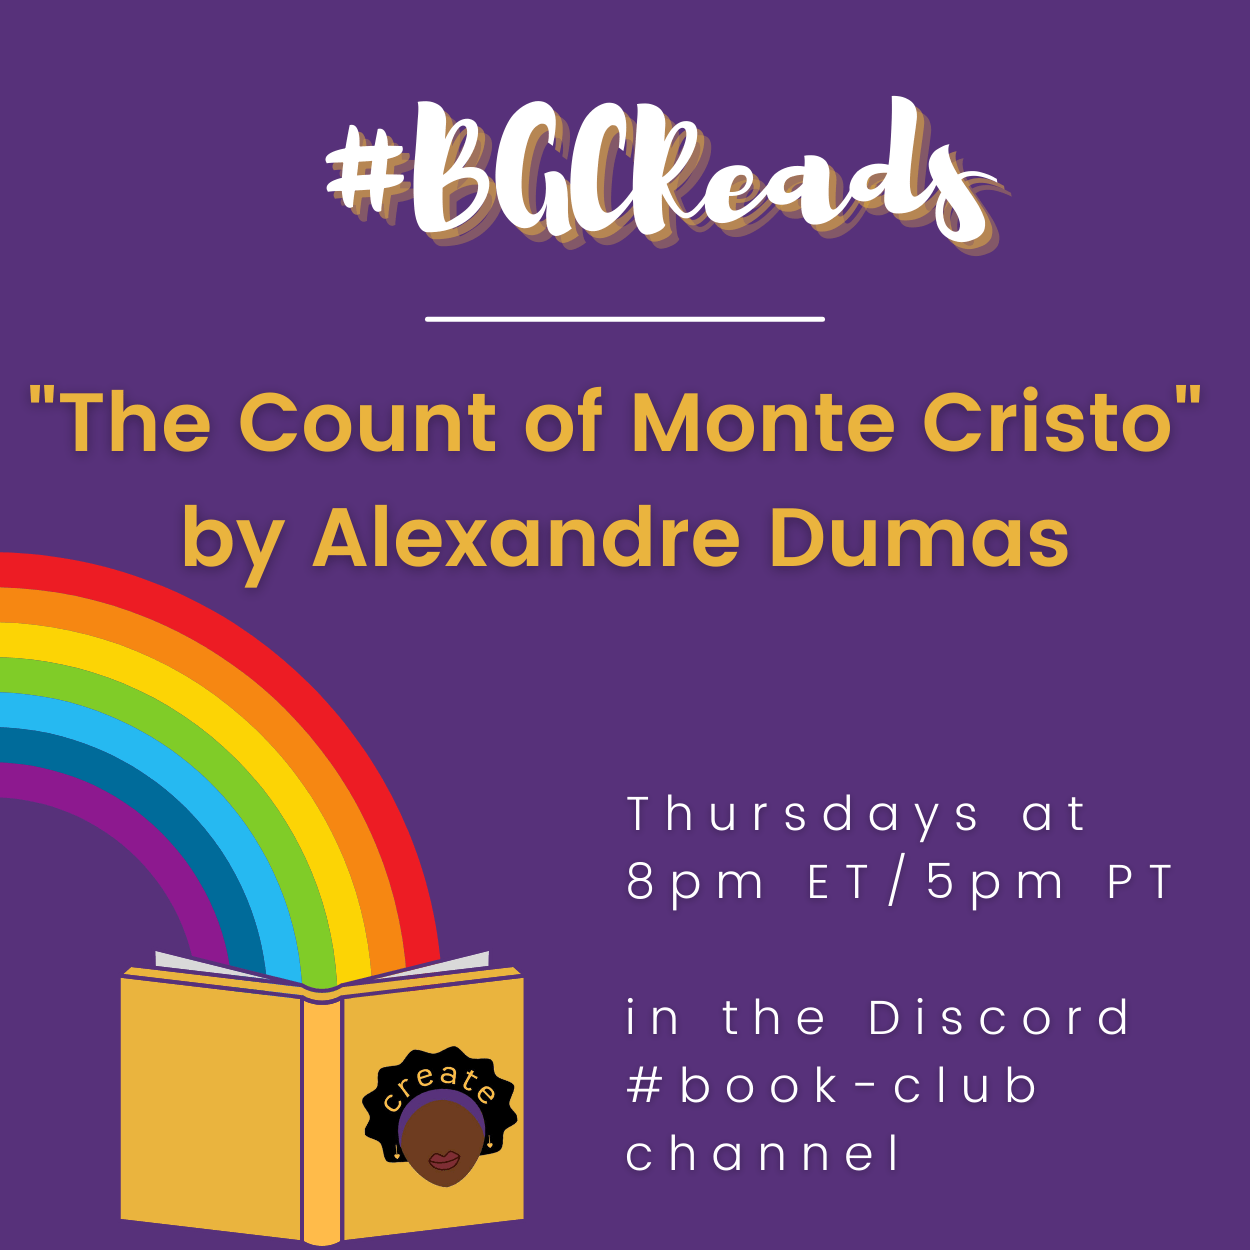 #BGCReads The Count of Monte Cristo by Alexandre Dumas Thursdays at 8p ET/5p PT in #book-club on Discord